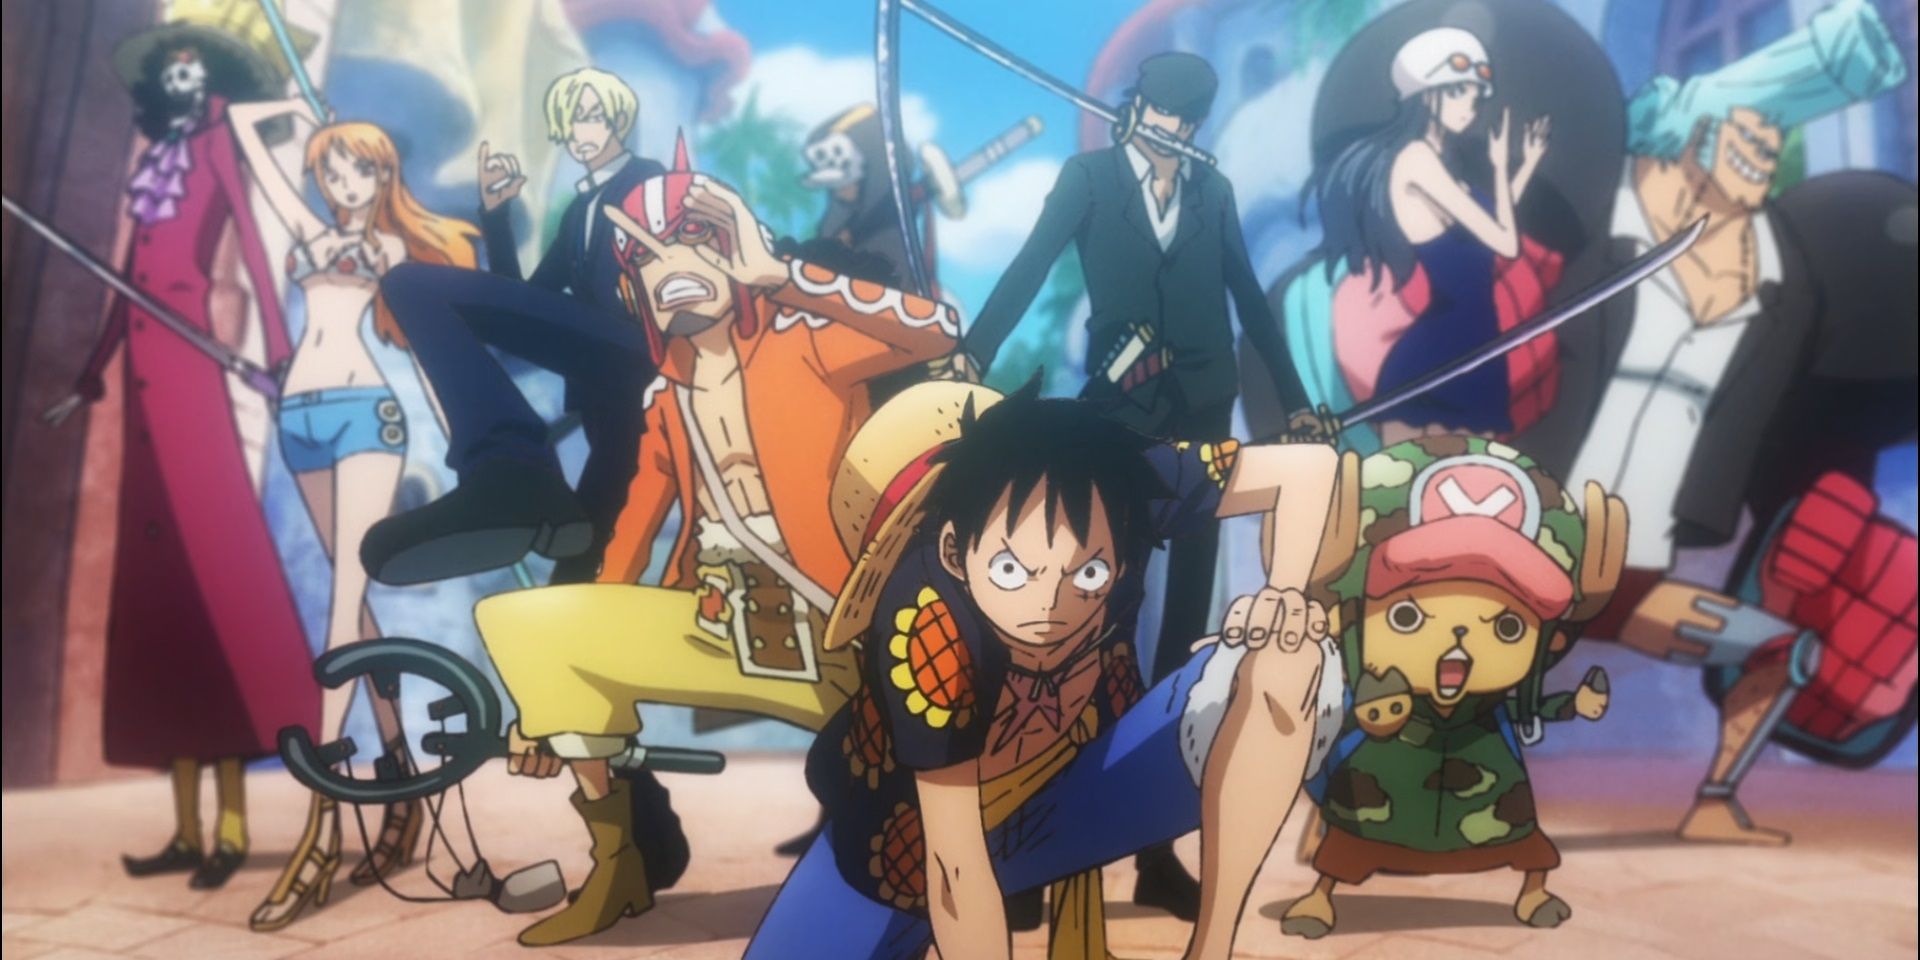 The Straw Hats as depicted in One Piece Episode 957, in a sequence storyboarded by Megumi Ishitani